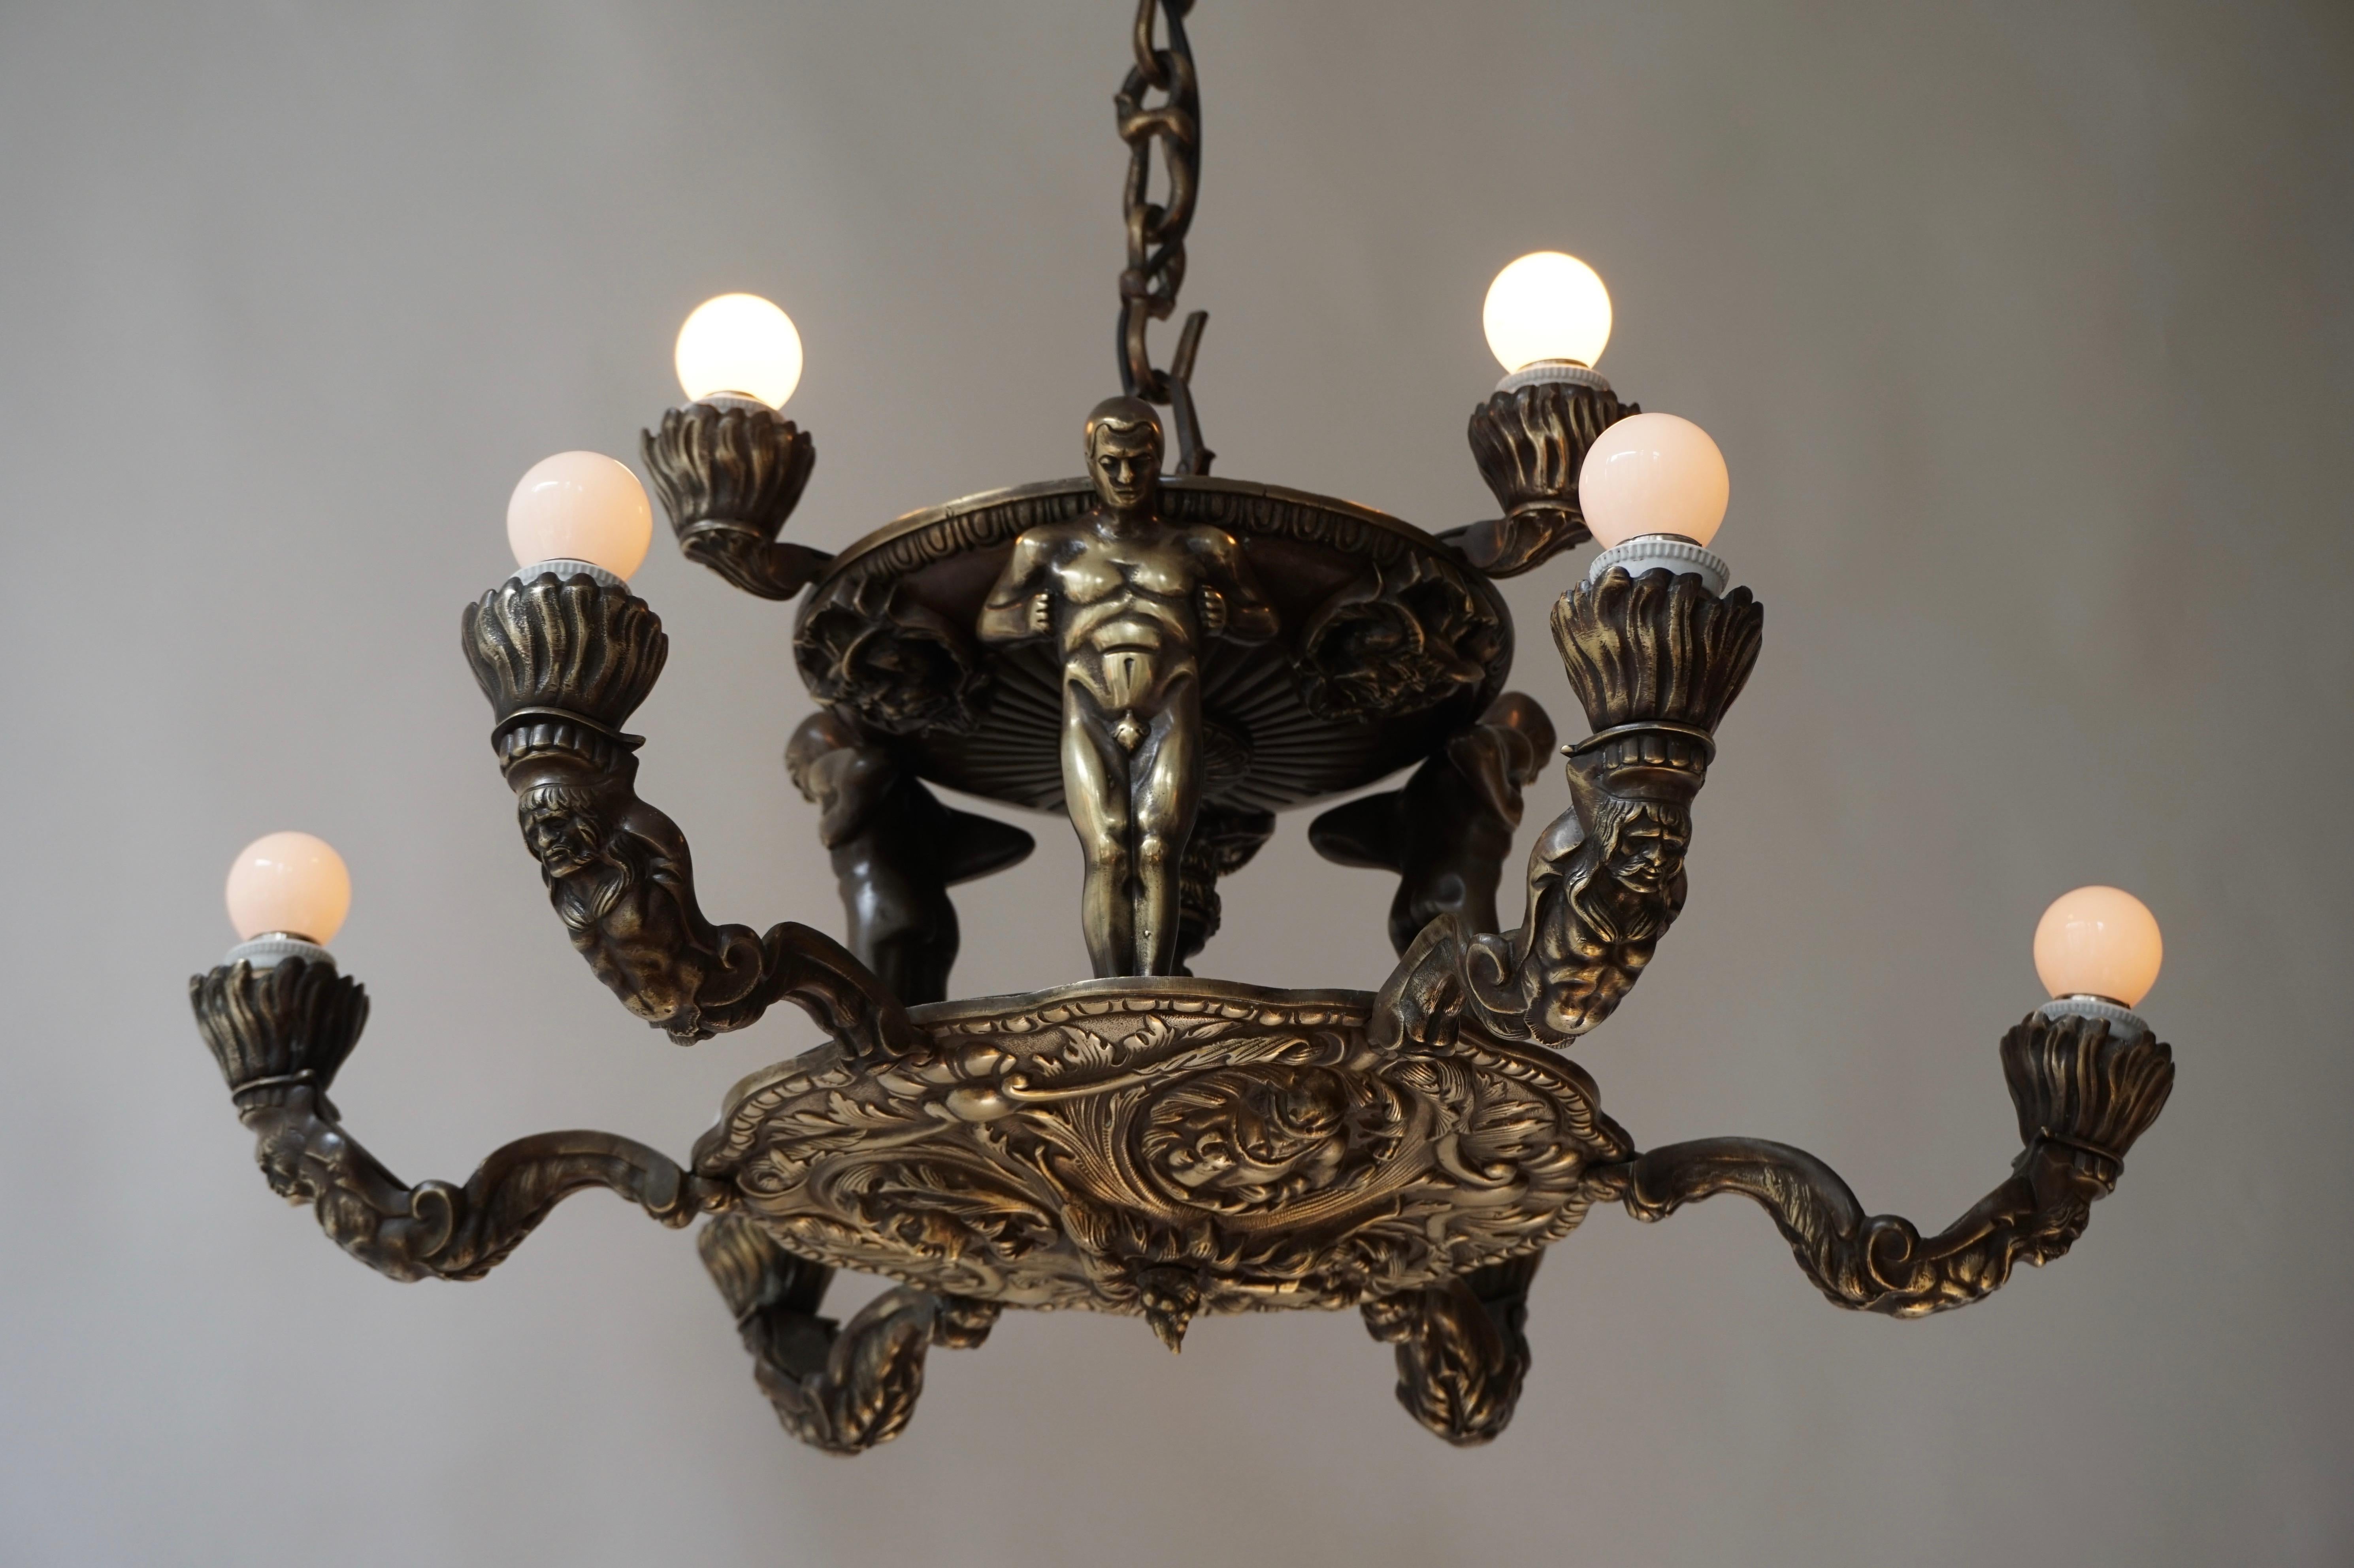 20th Century French Bronze Art Deco Hollywood Regency Chandelier Showing Male Nude Figures For Sale